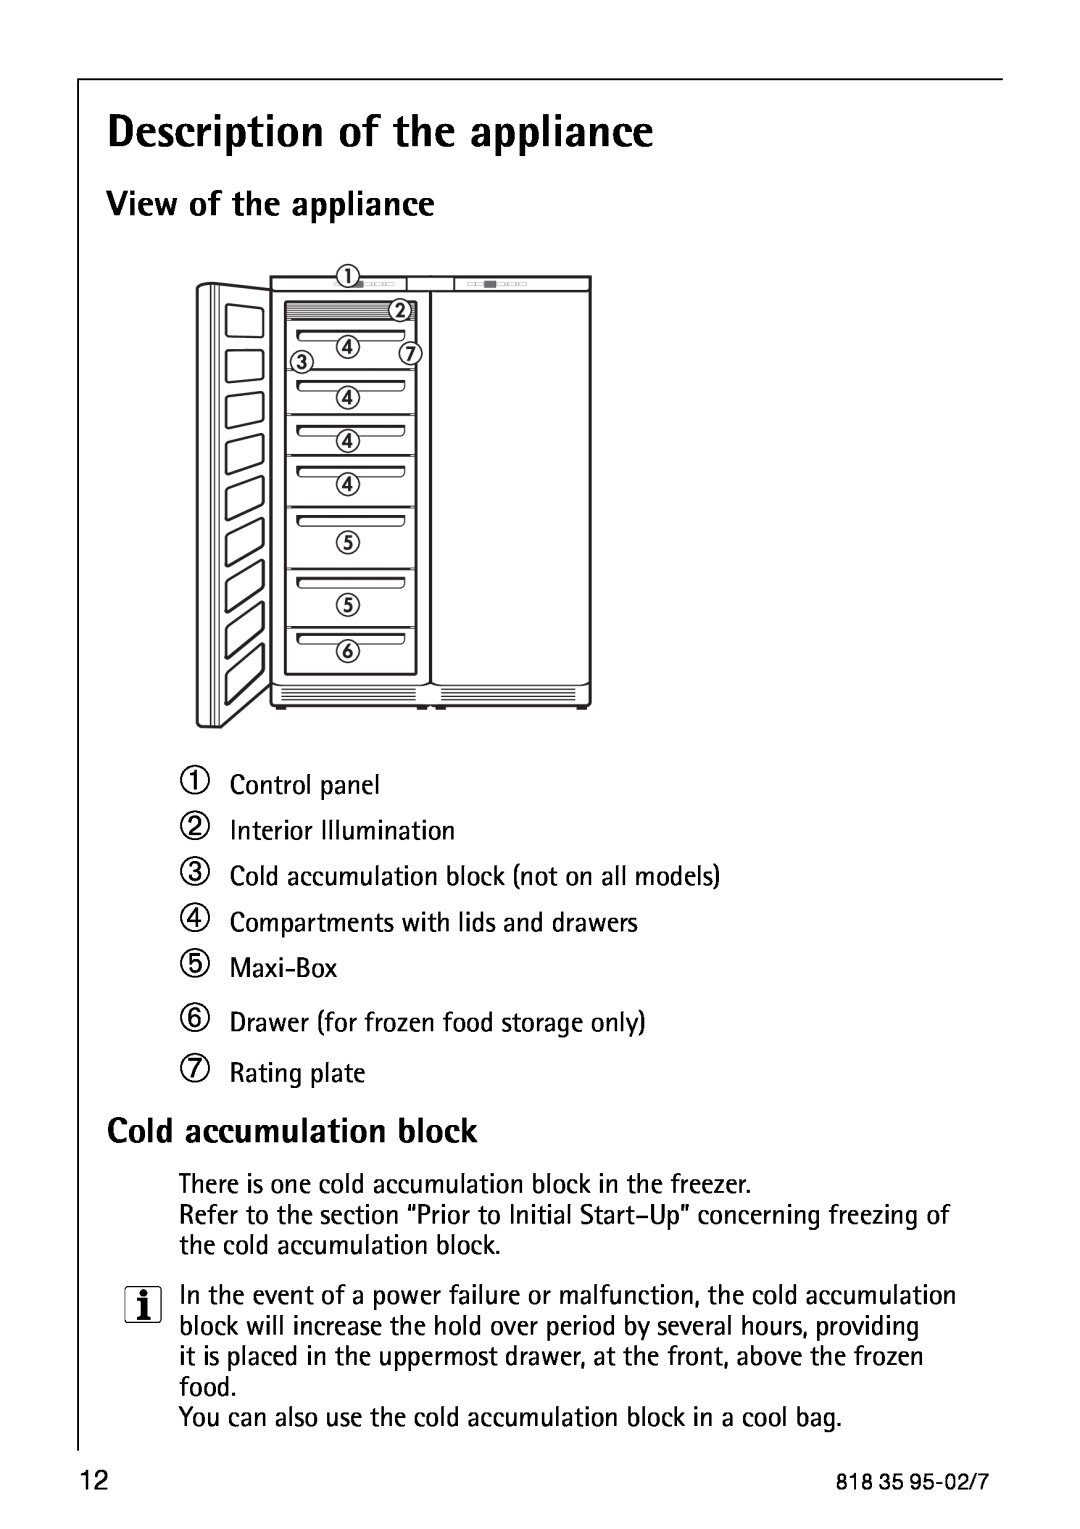 AEG S75578KG3 manual Description of the appliance, Cold accumulation block, View of the appliance 